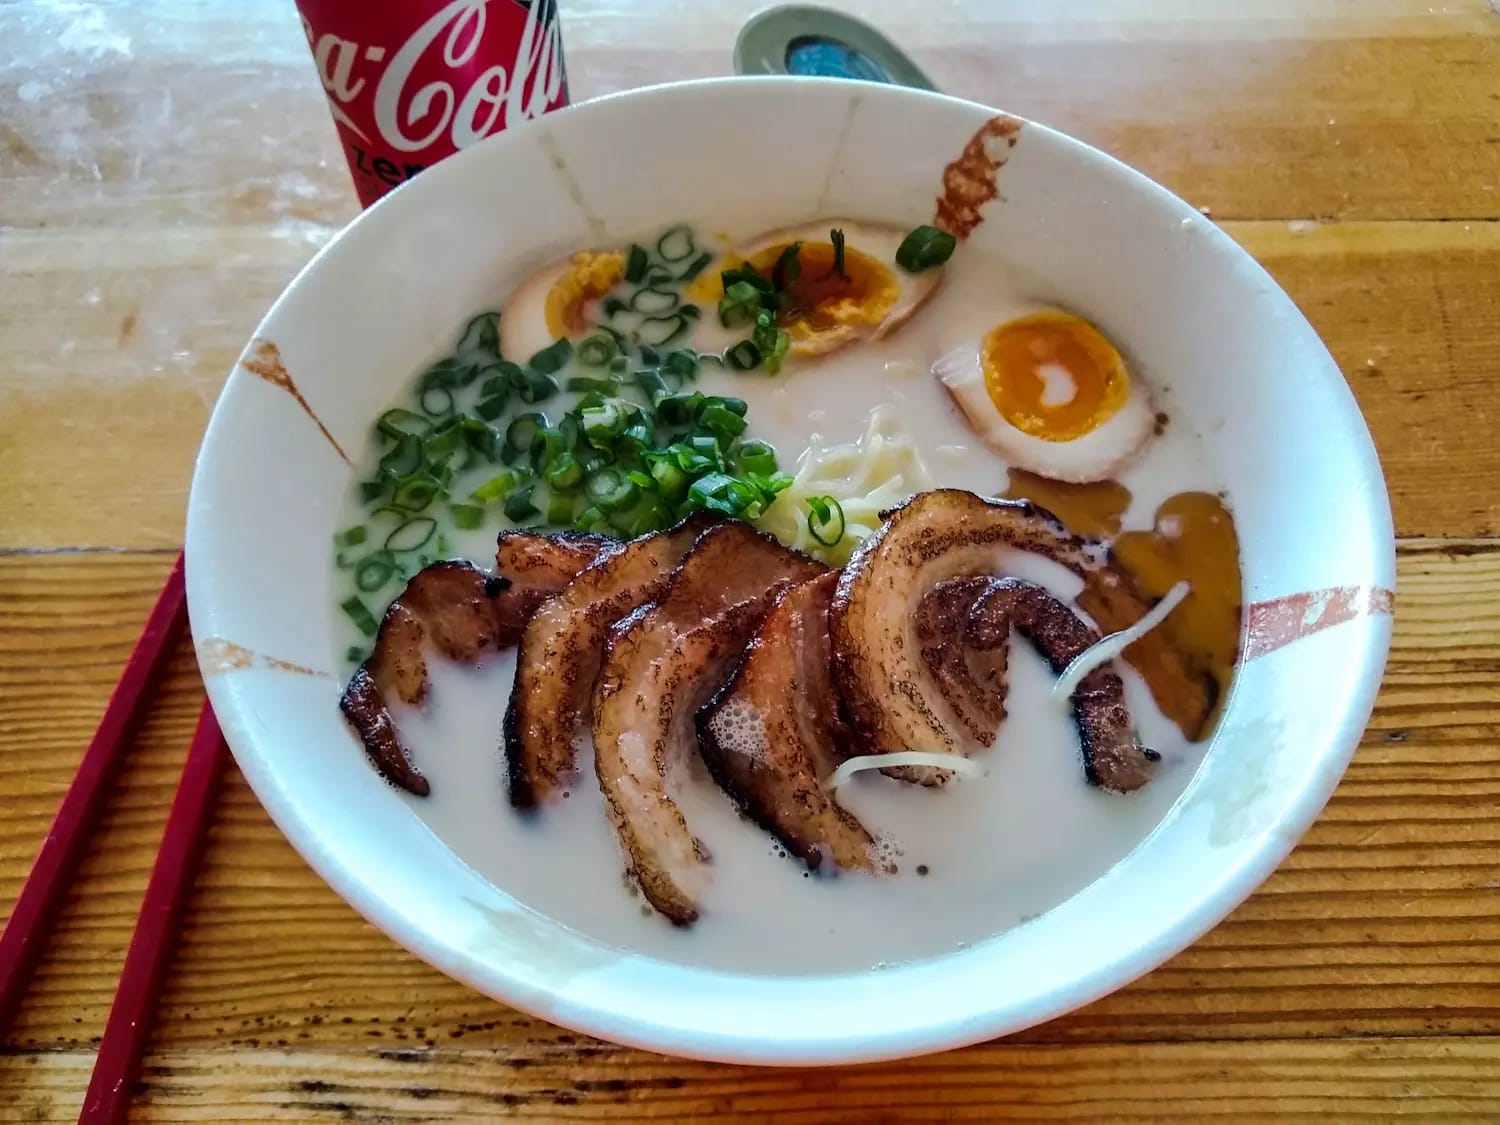 Tonkastu ramen with chasu, ajitama, negi, black sesame oil and one friggin noodle out of place I just noticed as I was posting this.